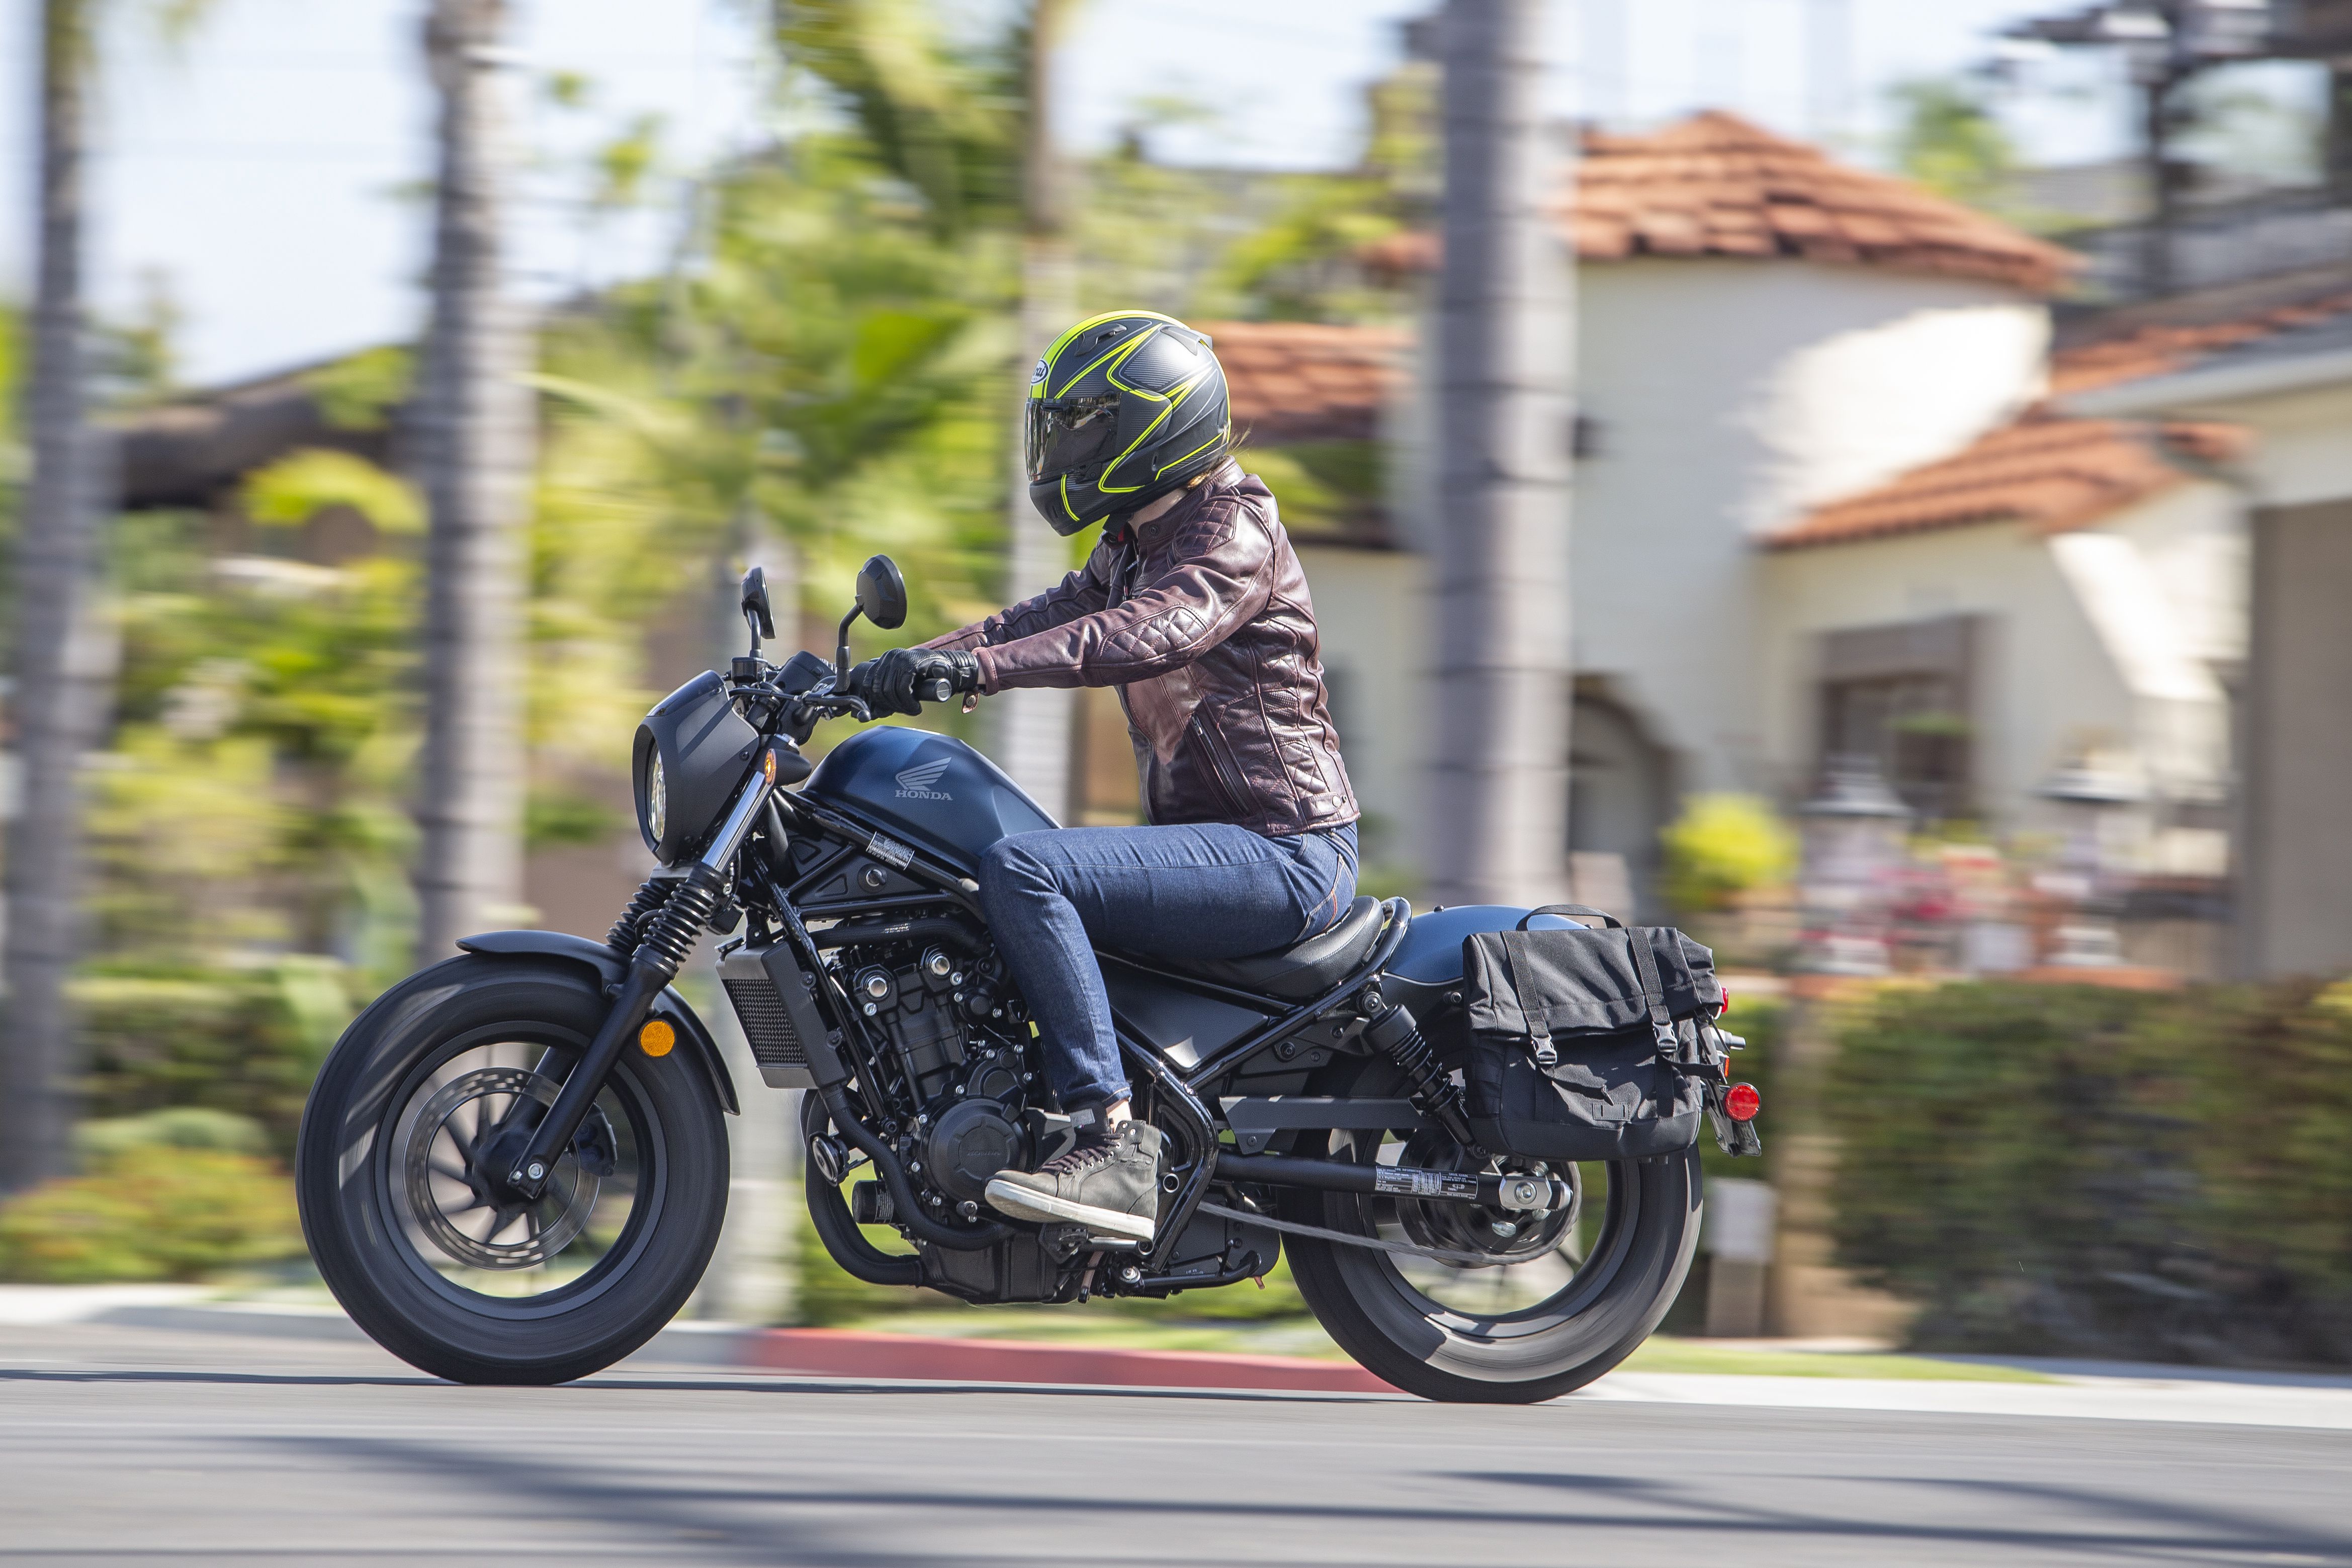 Honda Rebel 500 First Ride Review Cycle World